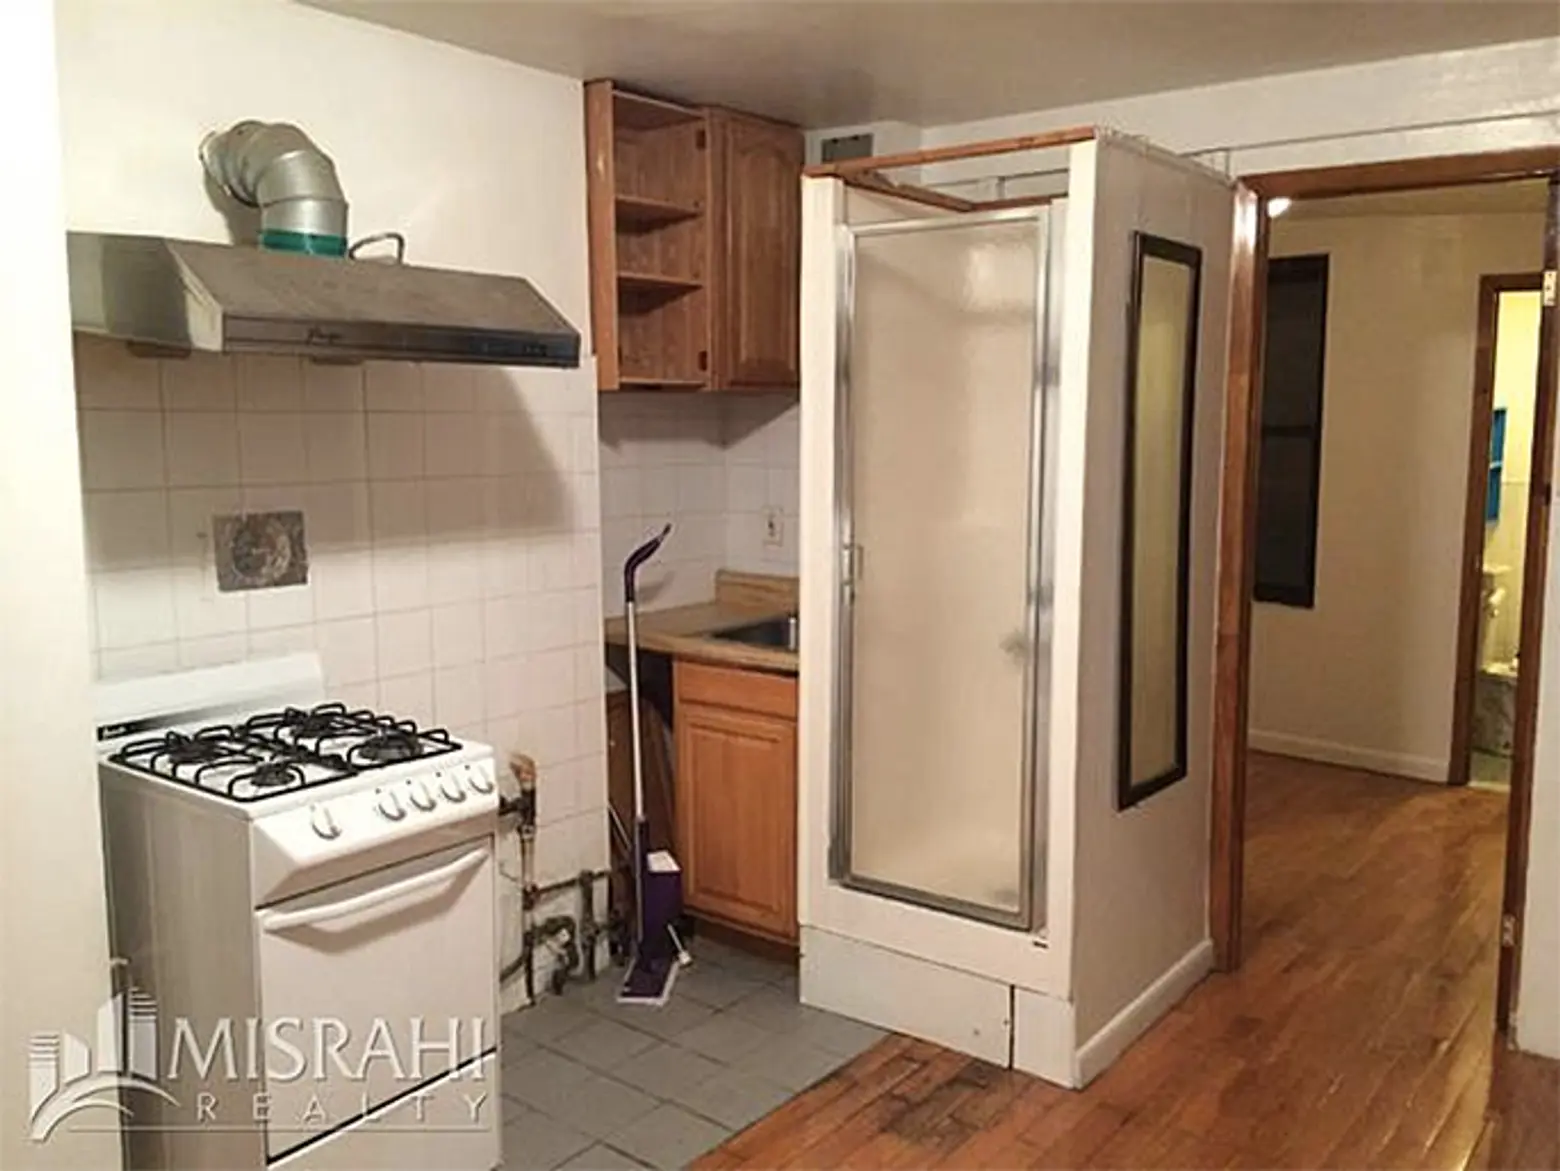 $1,795 LES Rental Proudly Features a Shower in the Kitchen